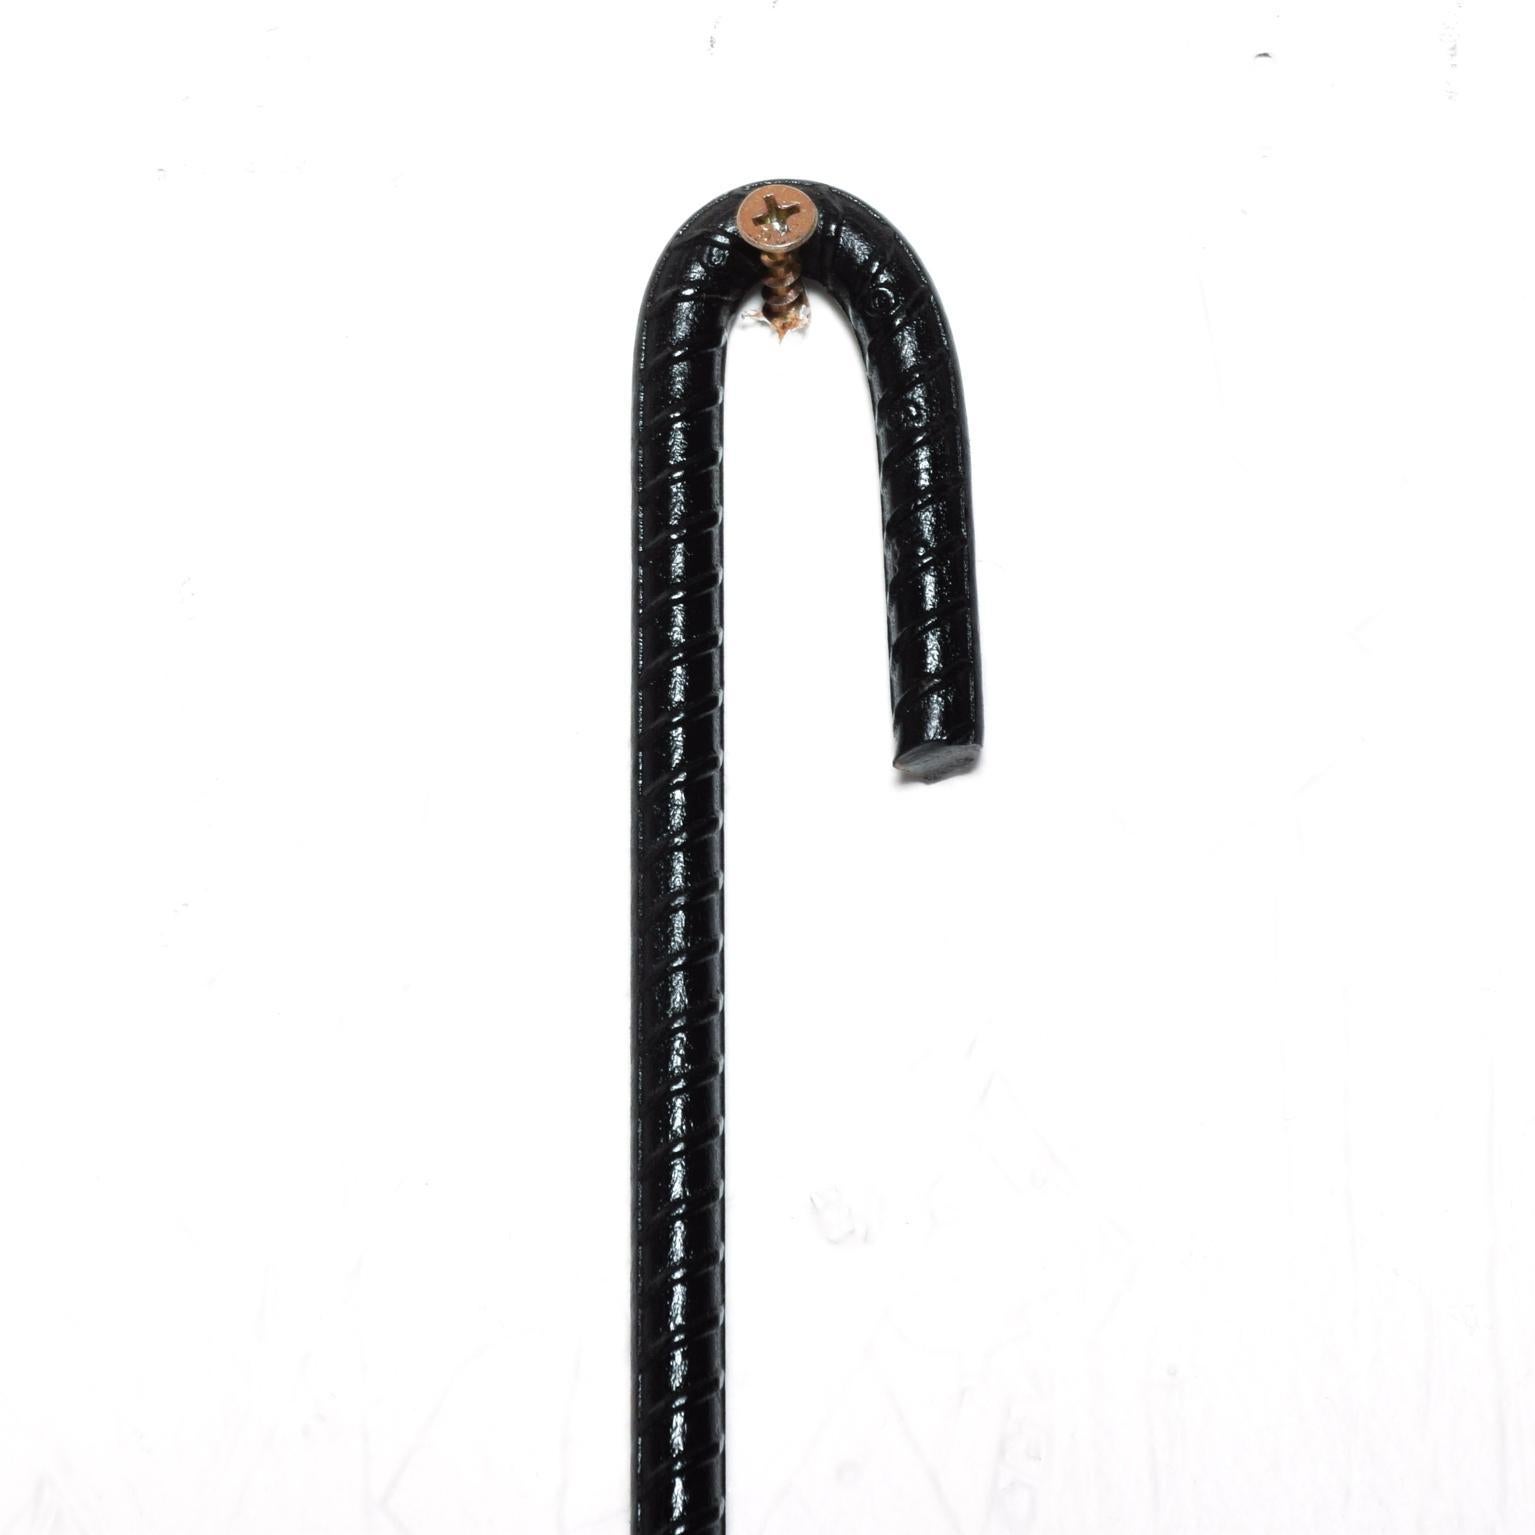 Hangers
Pair of Modern Sculptural Iron Coat Hangers.
Designed by AMBIANIC. Custom made.
Dimensions: 28 H x 17.75 x .38 thick.
Finished in Satin Black. 
USA 2020 production. 
New production. See dealer AMBIANIC
Refer to images. 
